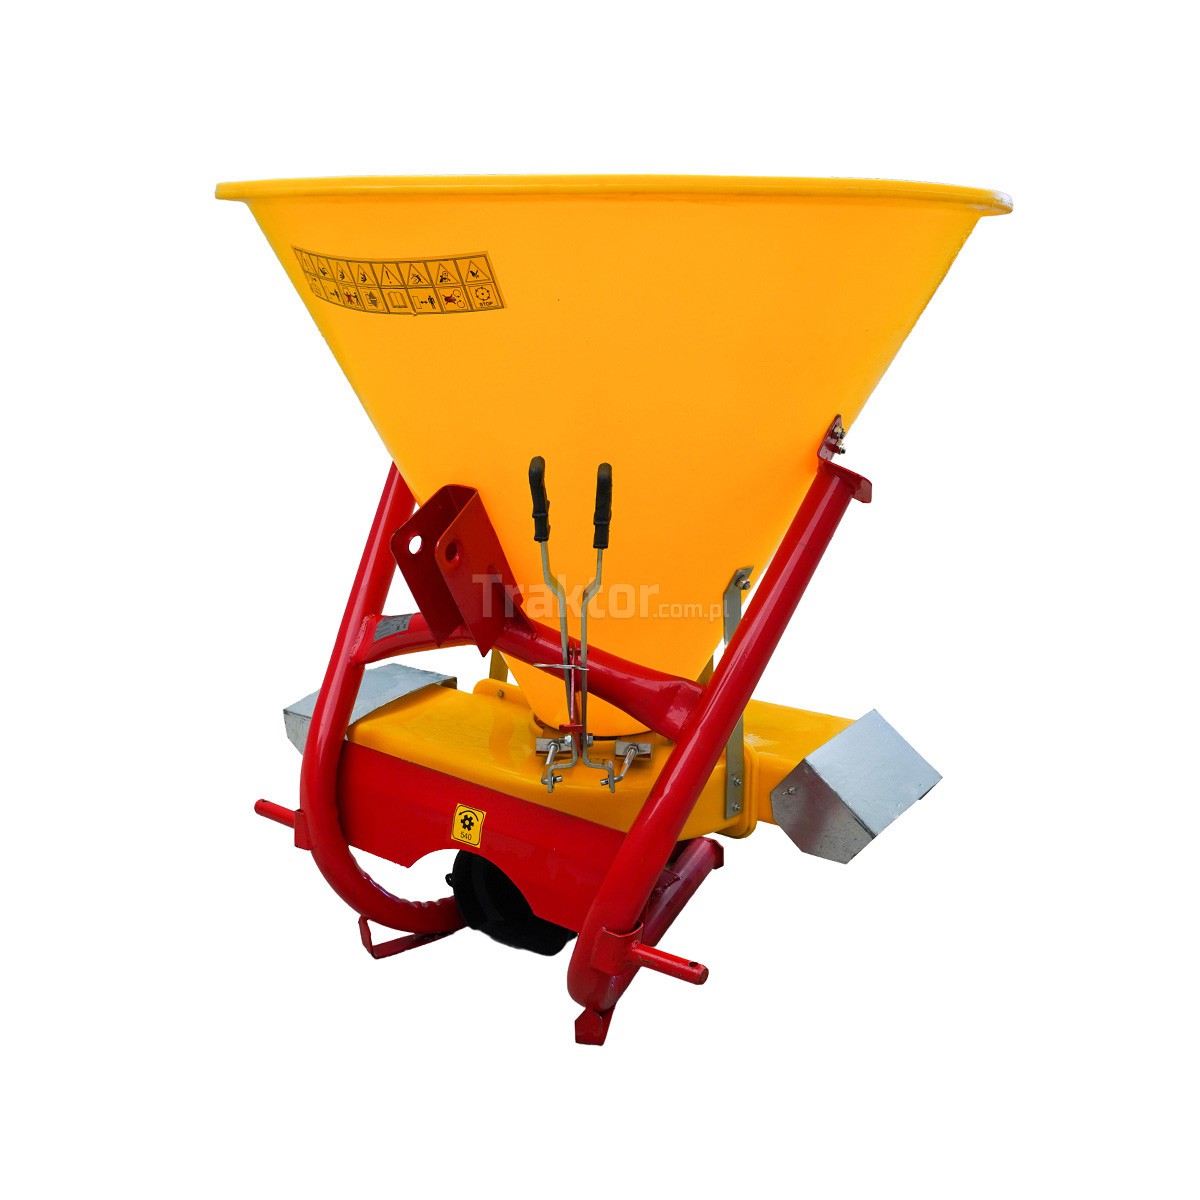 Orchard spreader with the S300 Strumyk attachment